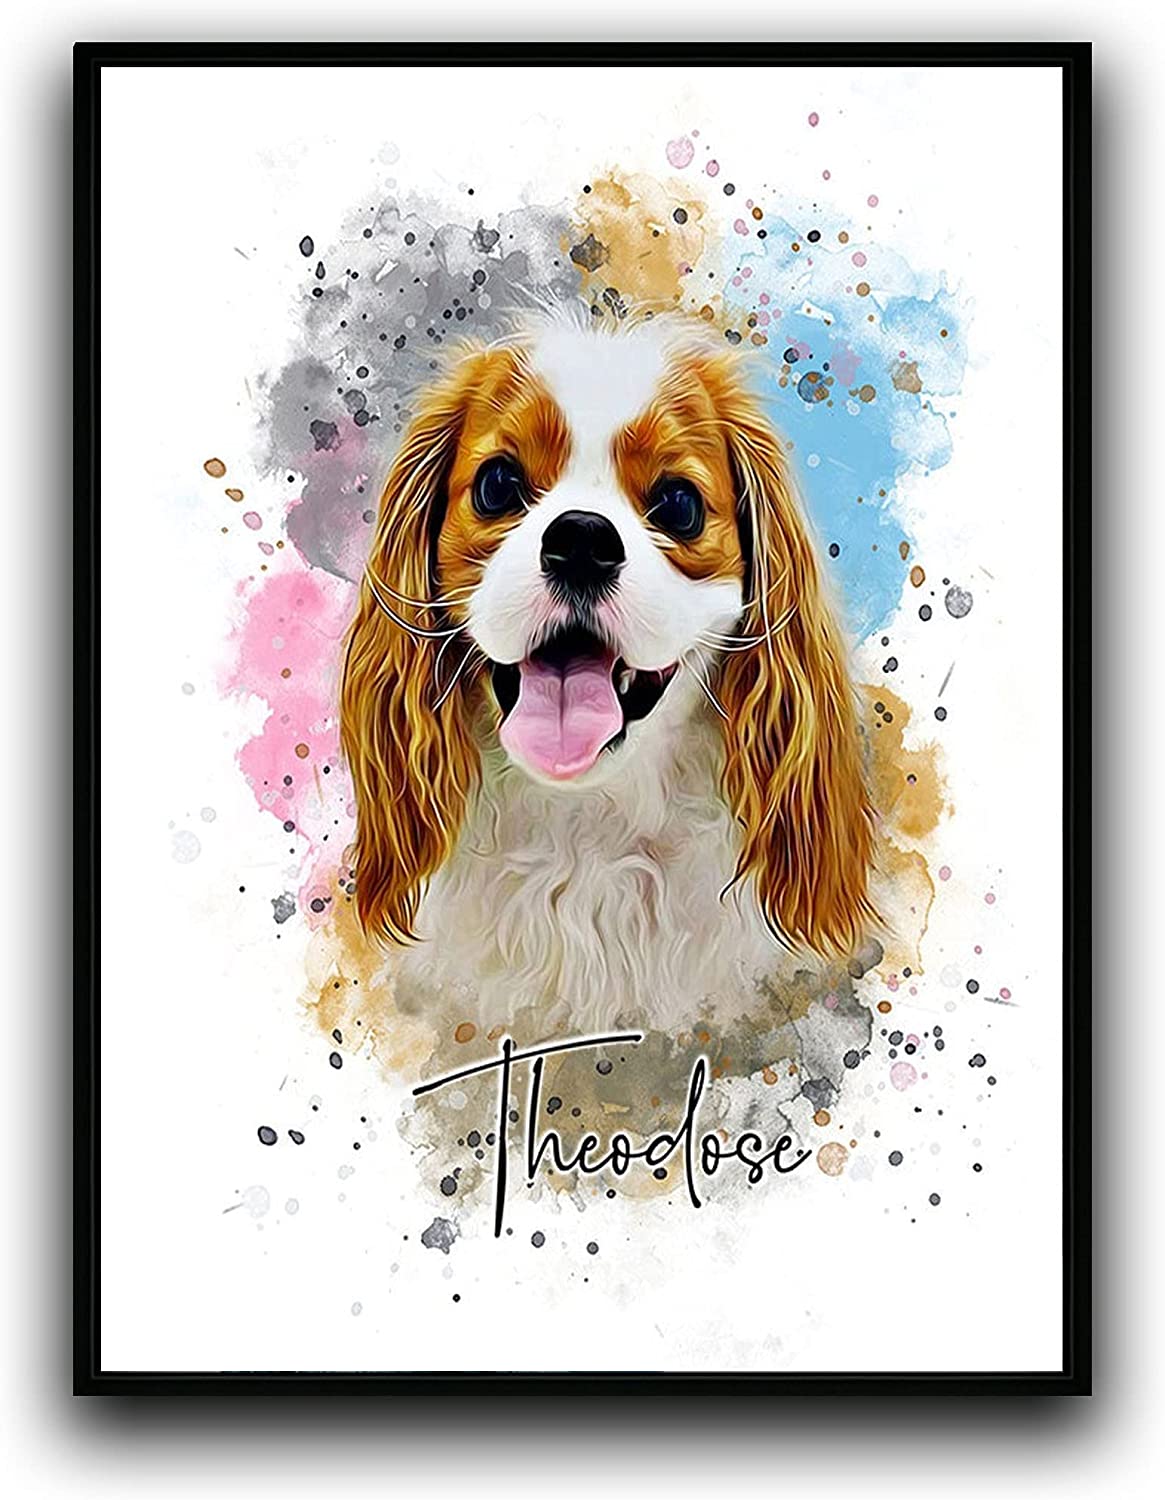 Custom Dog/Cat/Pet Portrait Cartoon Watercolor Effect Photo Paints on Canvas with Your Uploads Wall Art for Home Decoration, Personalized Memorial Gift for Pet Lovers